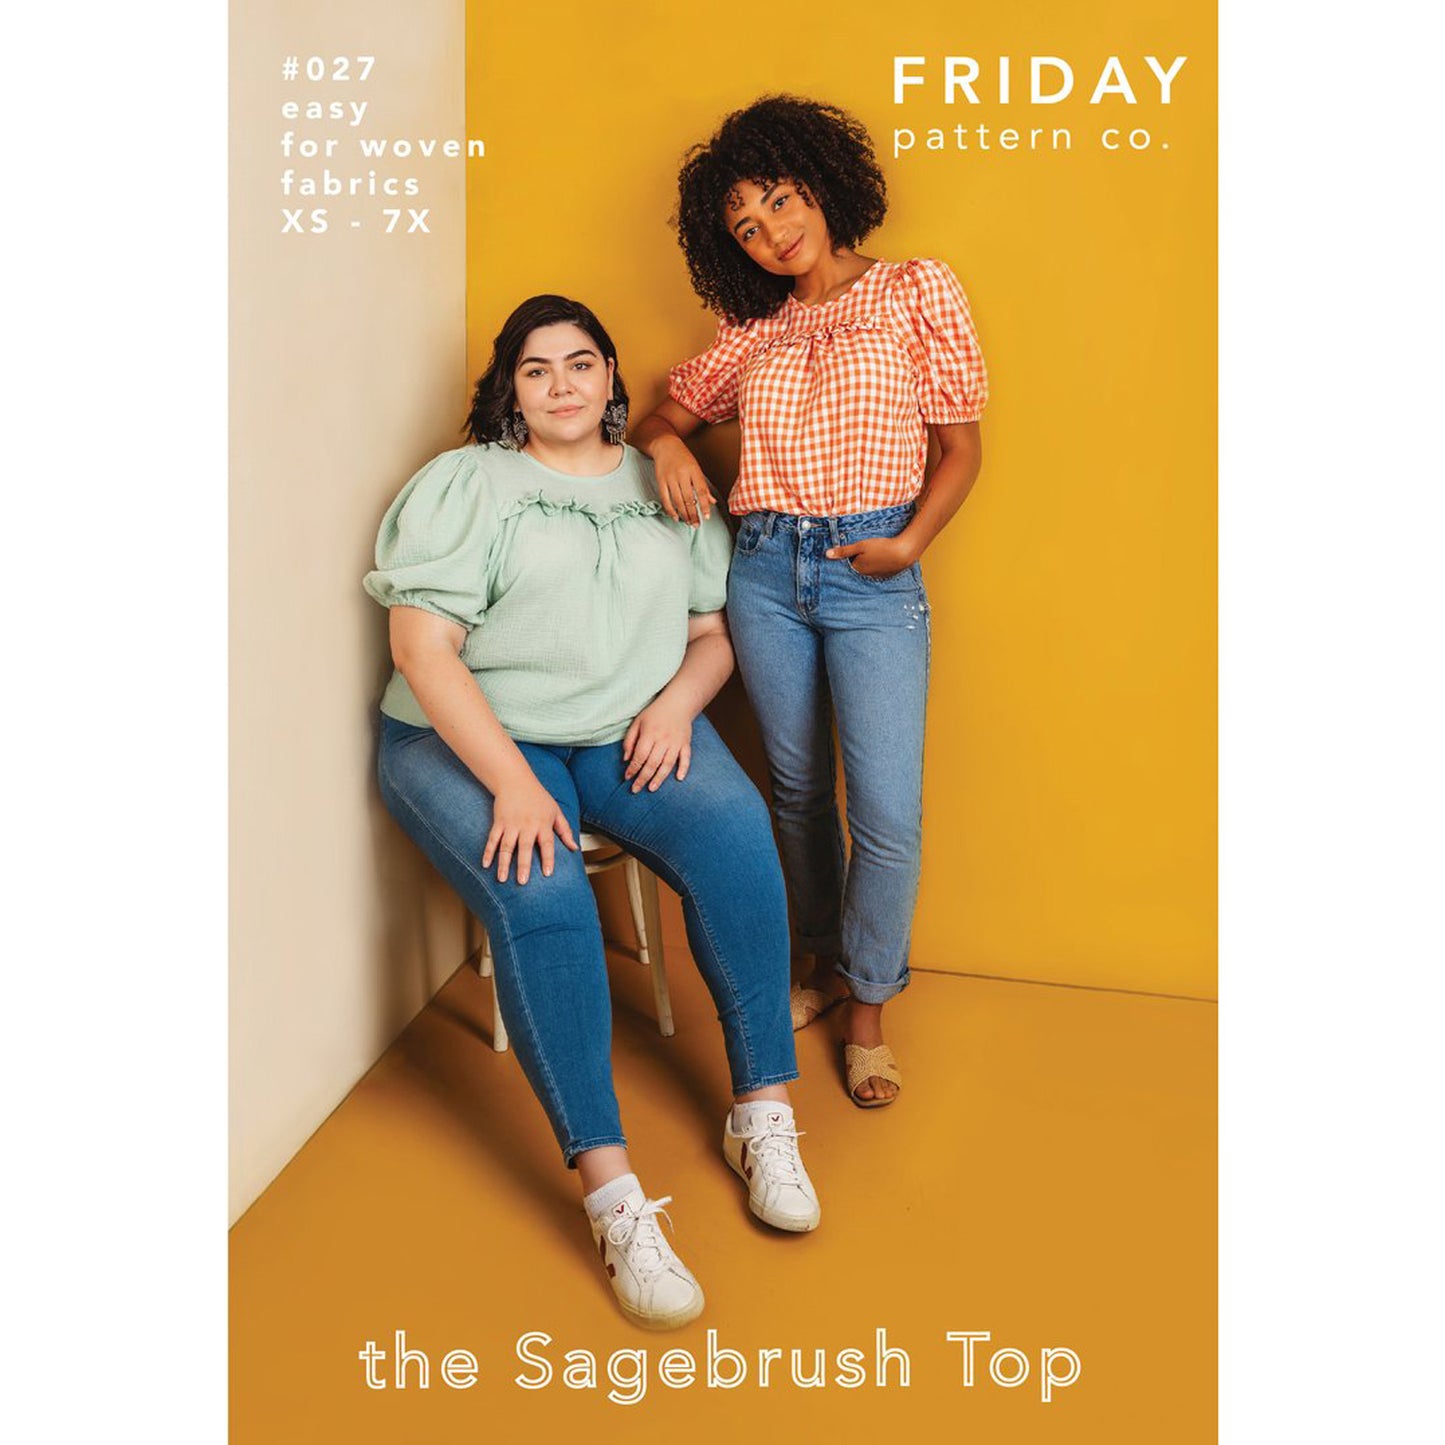 The Sagebrush Top Sewing Pattern - Friday Pattern Company